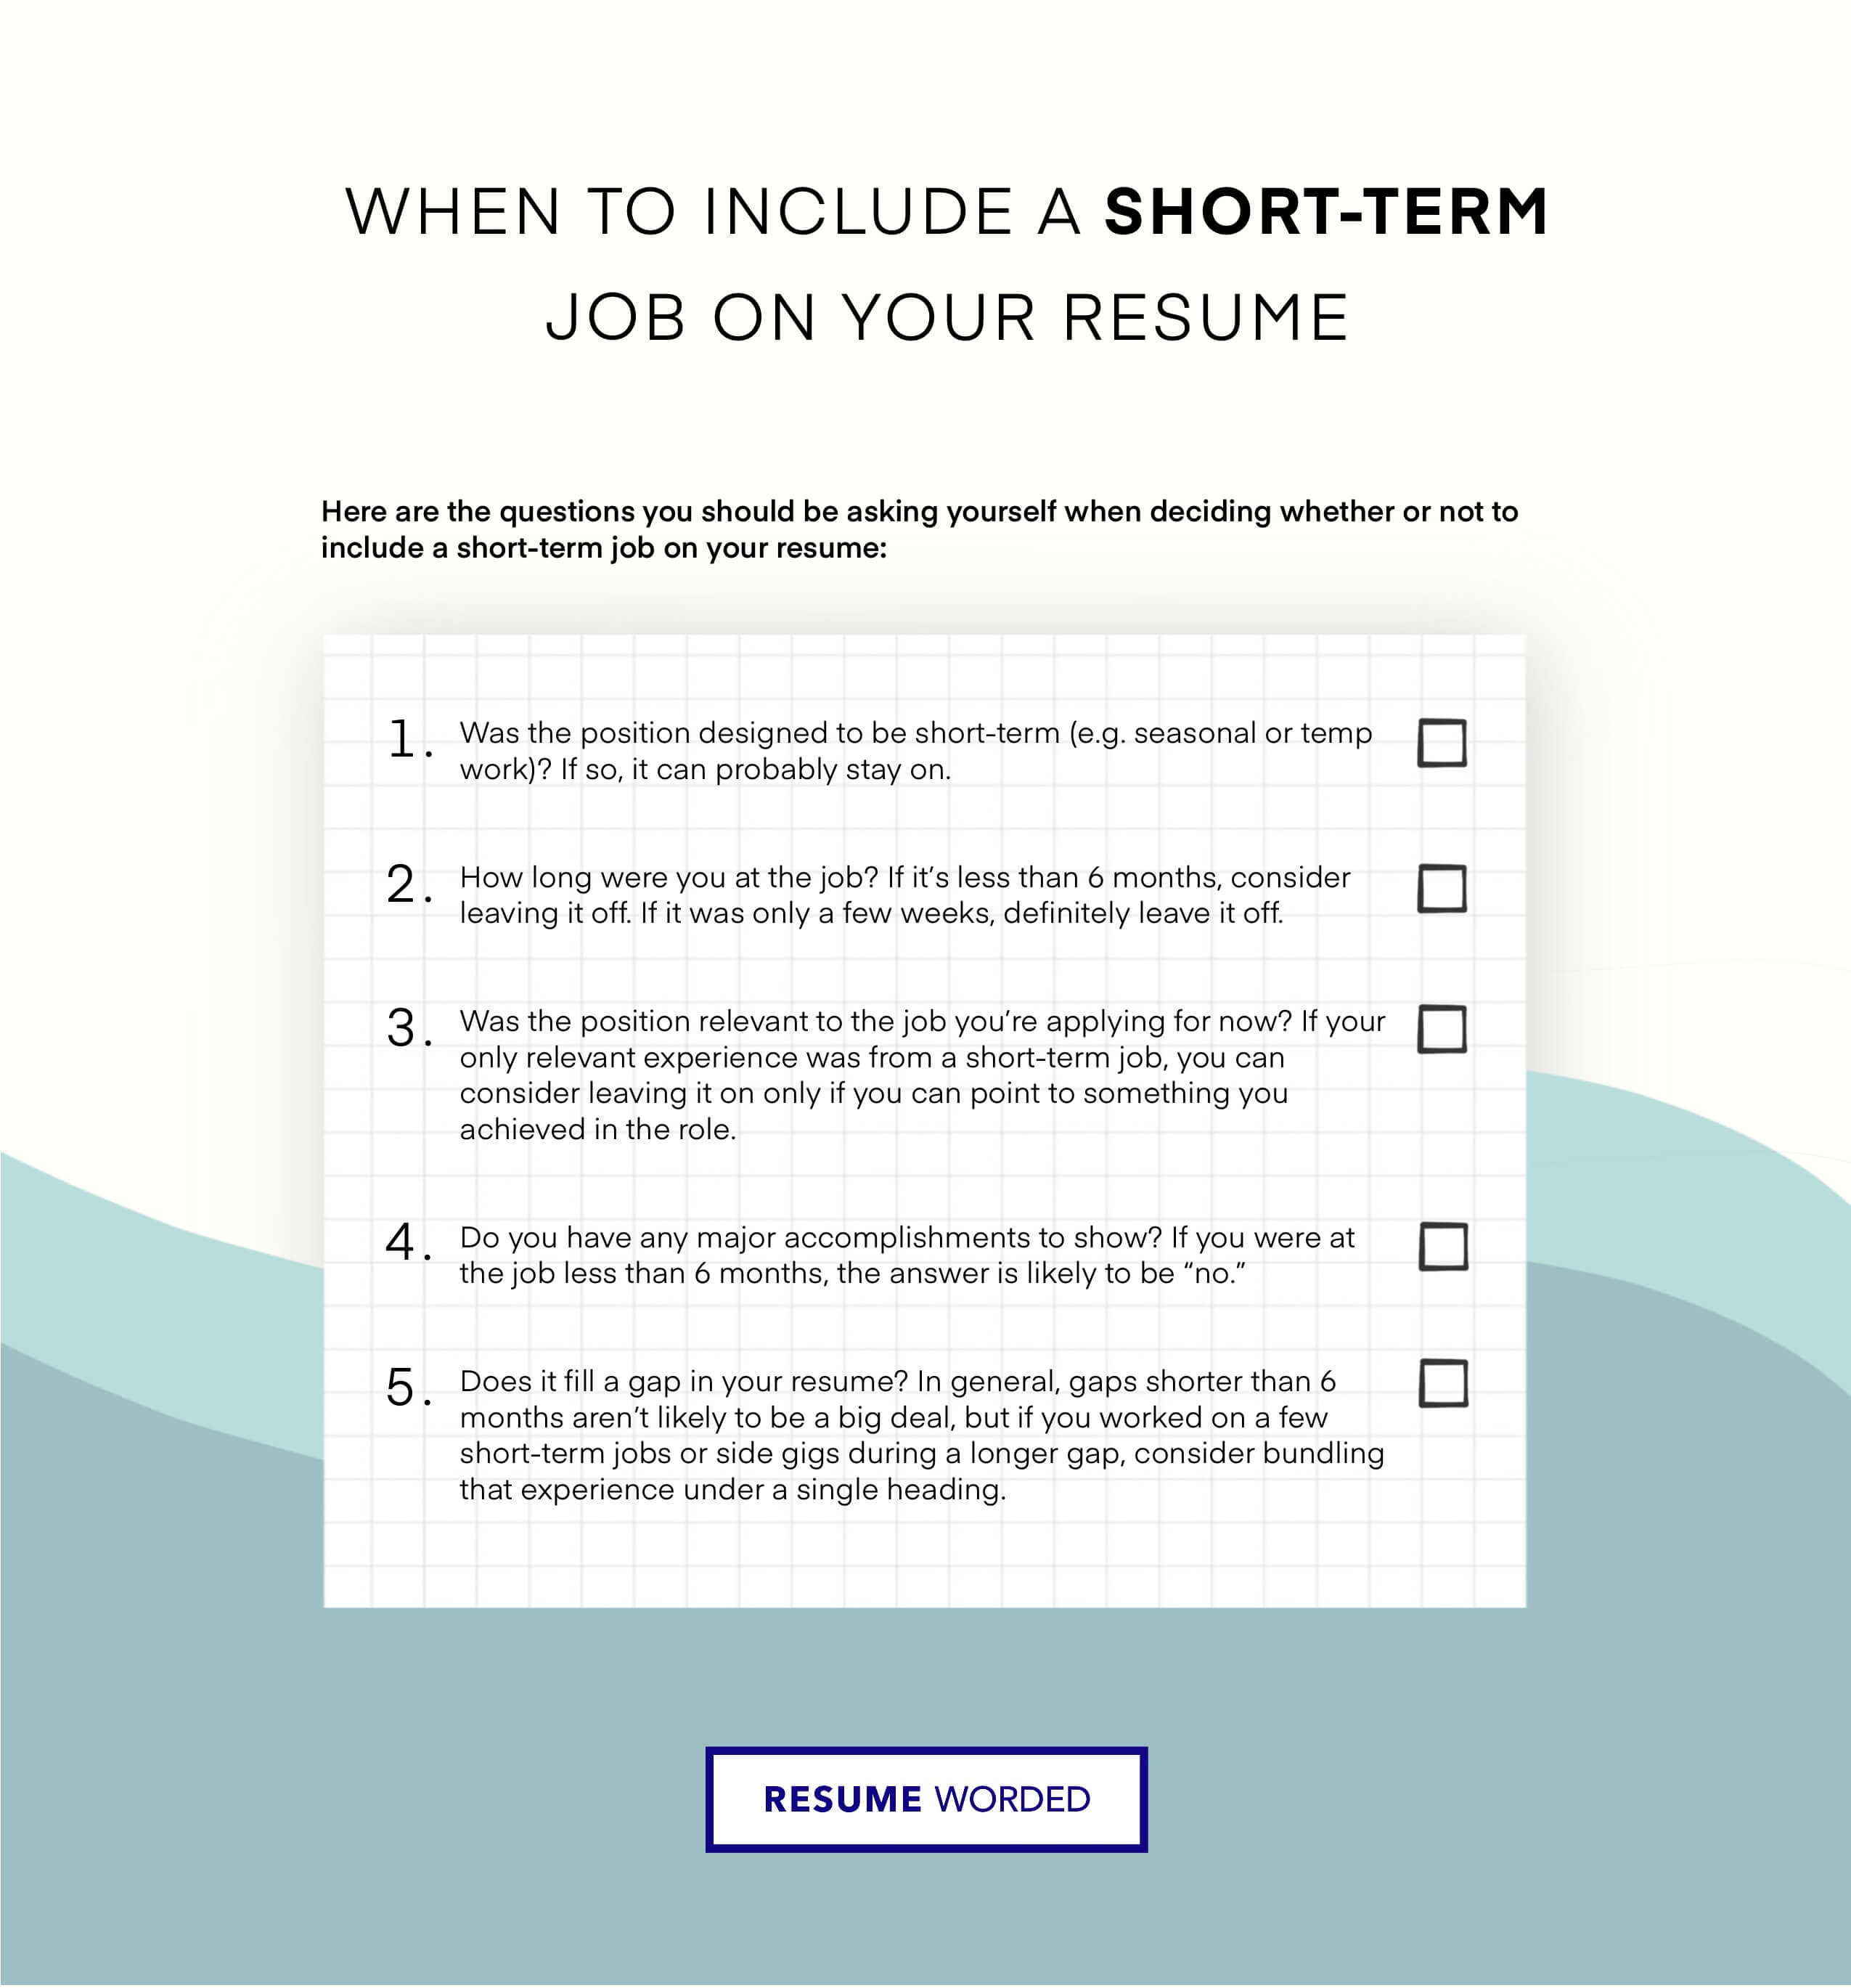 When to include a short-term job on your resume